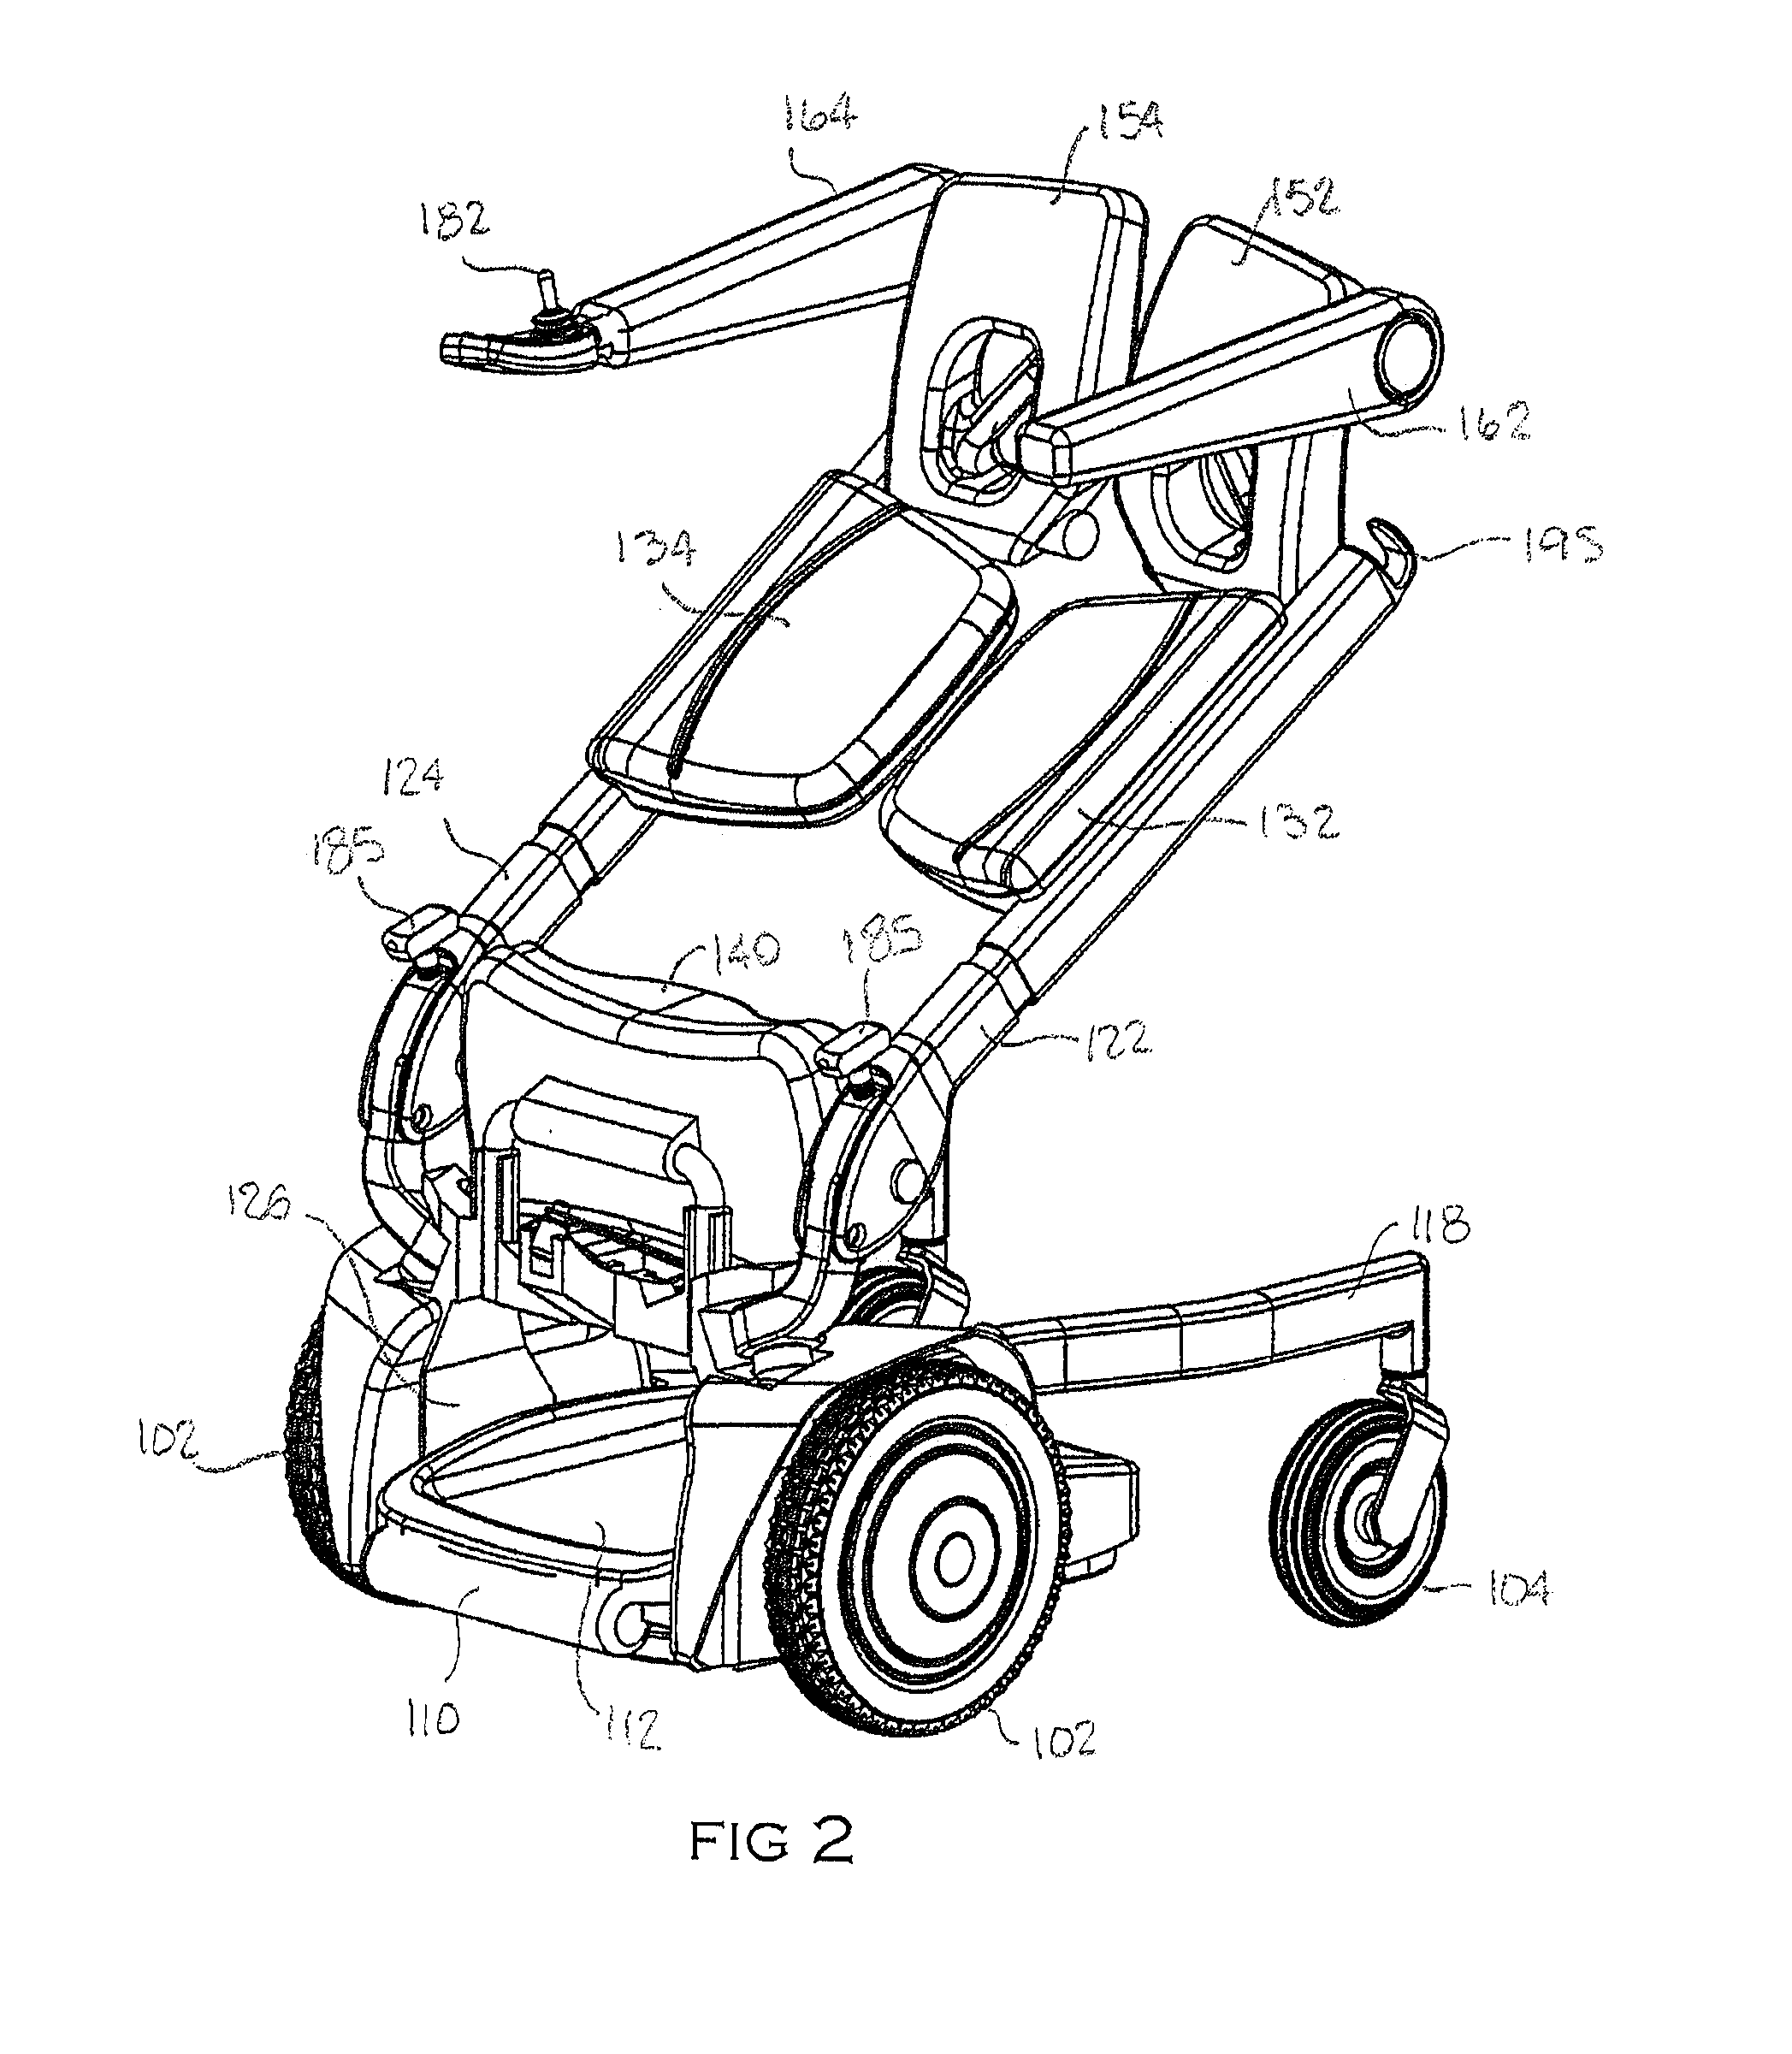 Mobility Device